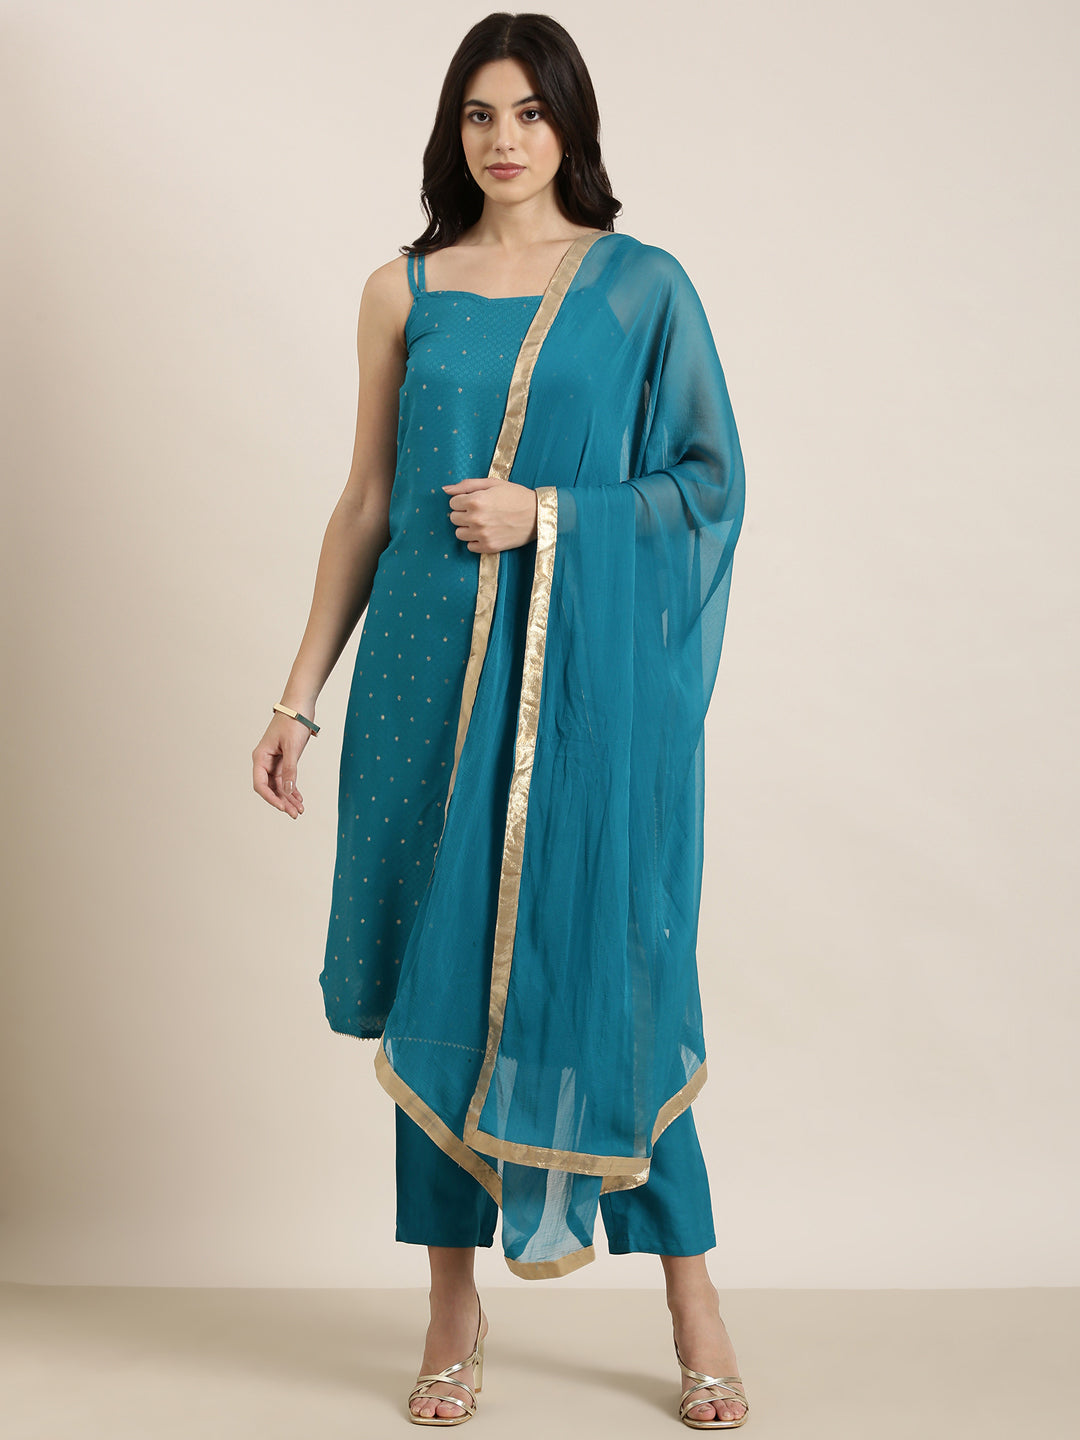 Women Straight Blue Woven Design Kurta and Trousers Set Comes With Dupatta